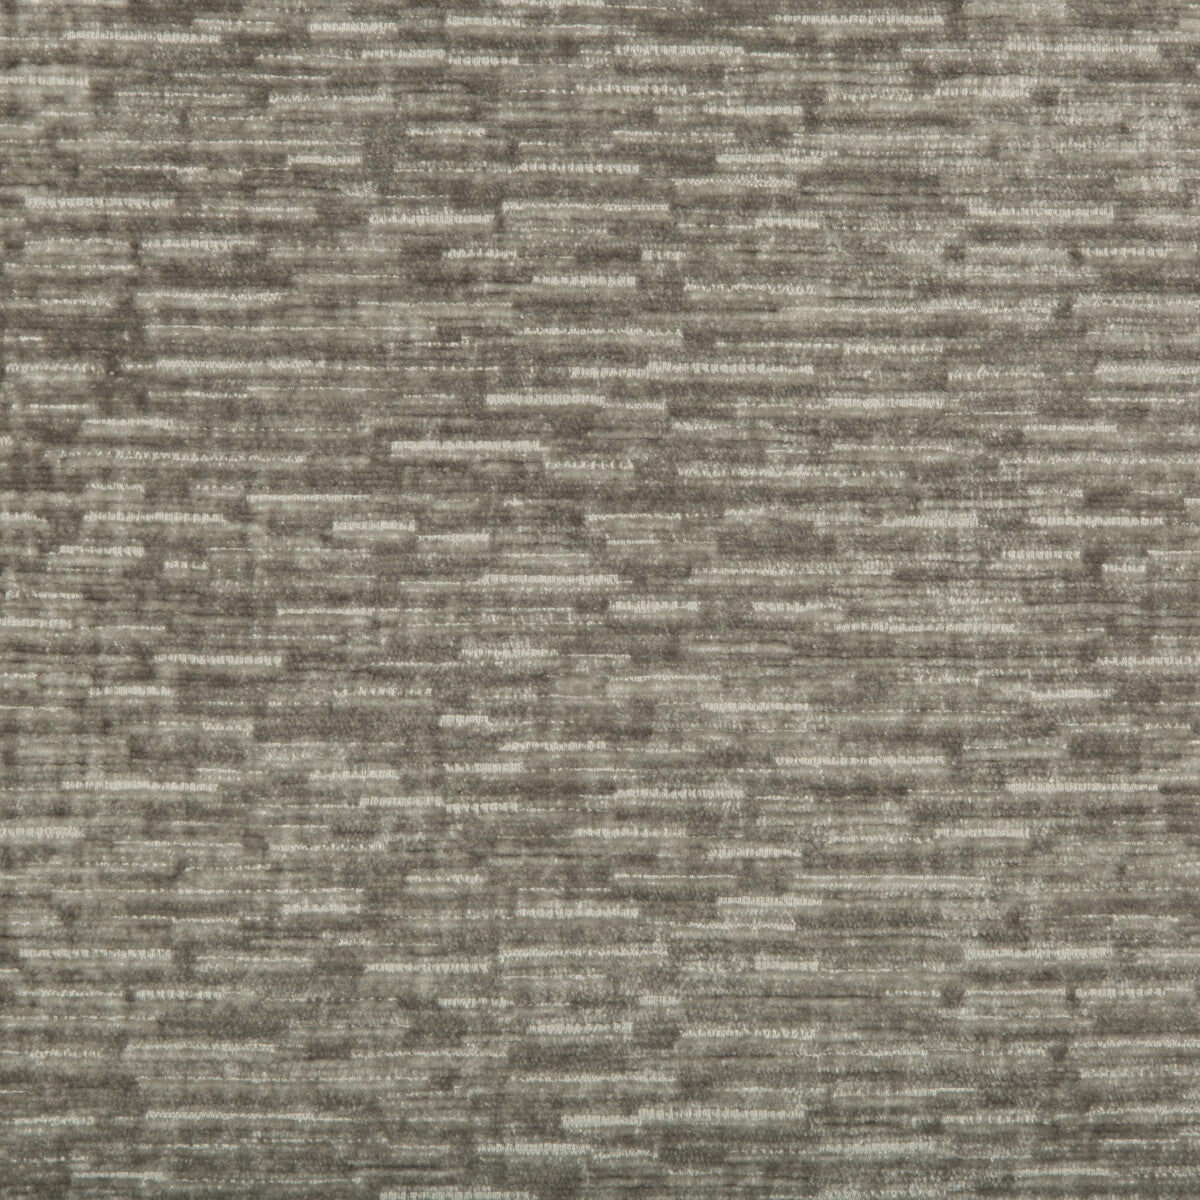 Kravet Smart fabric in 34731-11 color - pattern 34731.11.0 - by Kravet Smart in the Performance collection